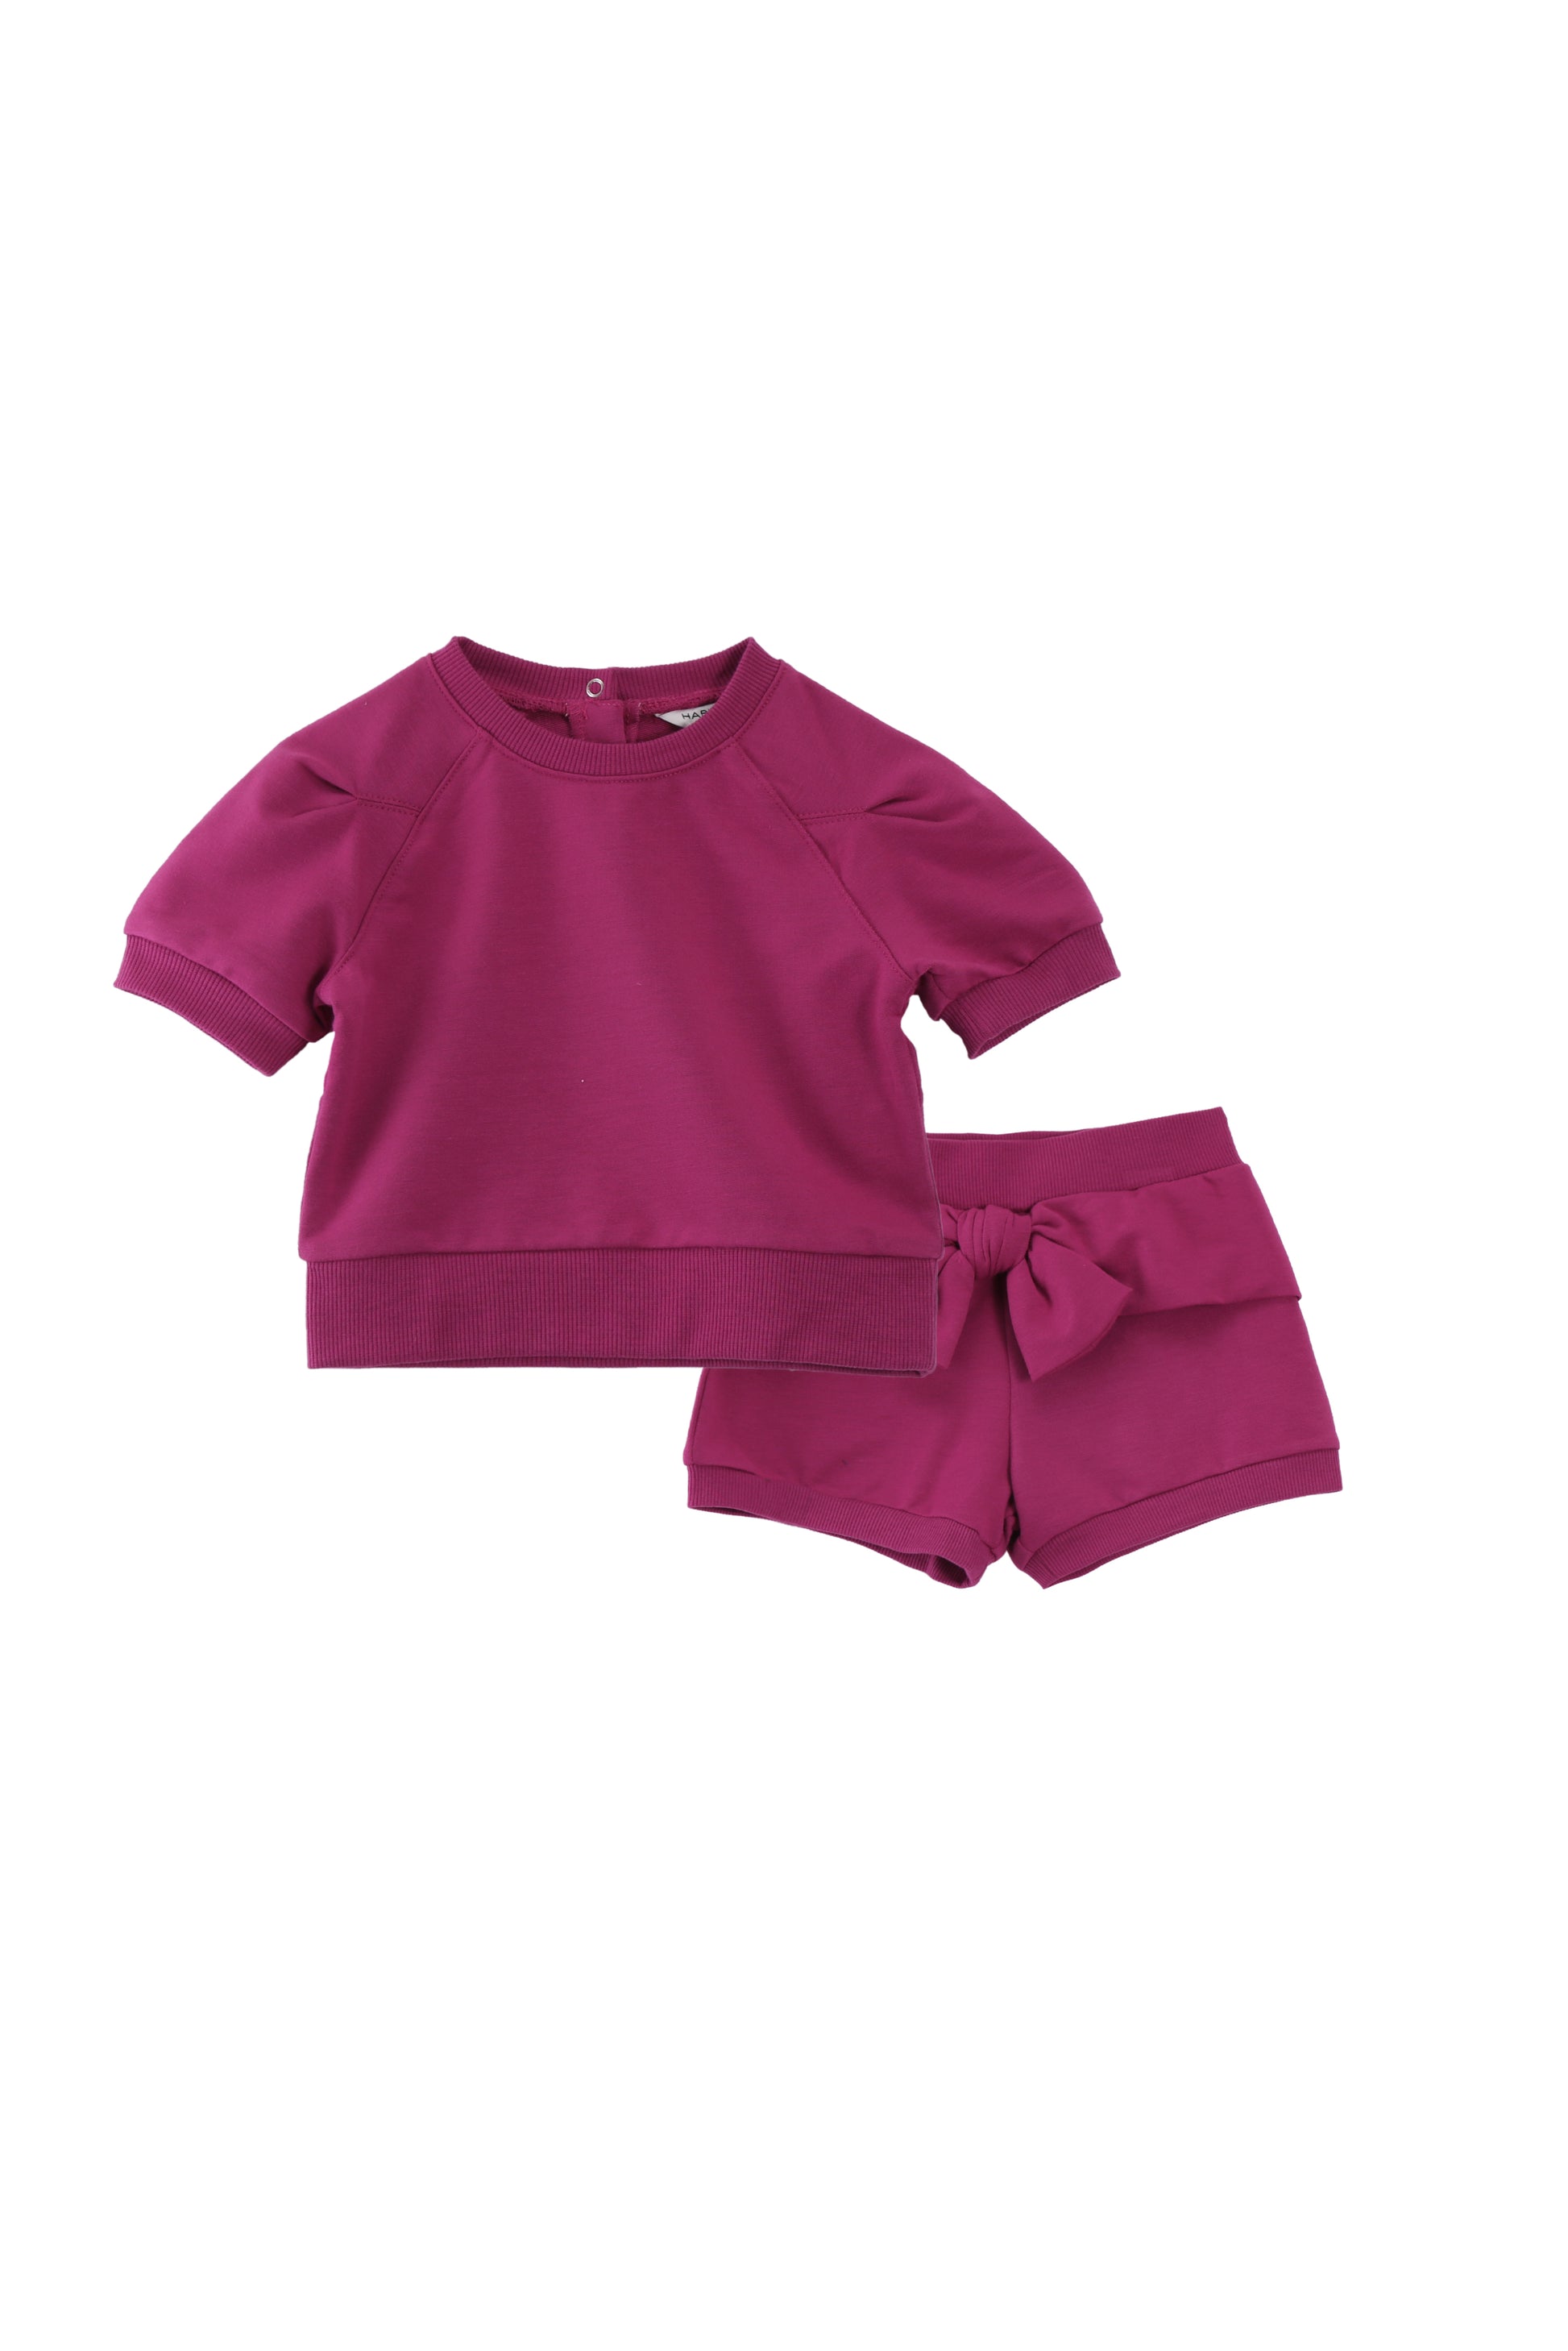 DARK MAGENTA FRENCH TERRY SWEATSHIRT TOP AND SWEAT SHORTS WITH A BOW